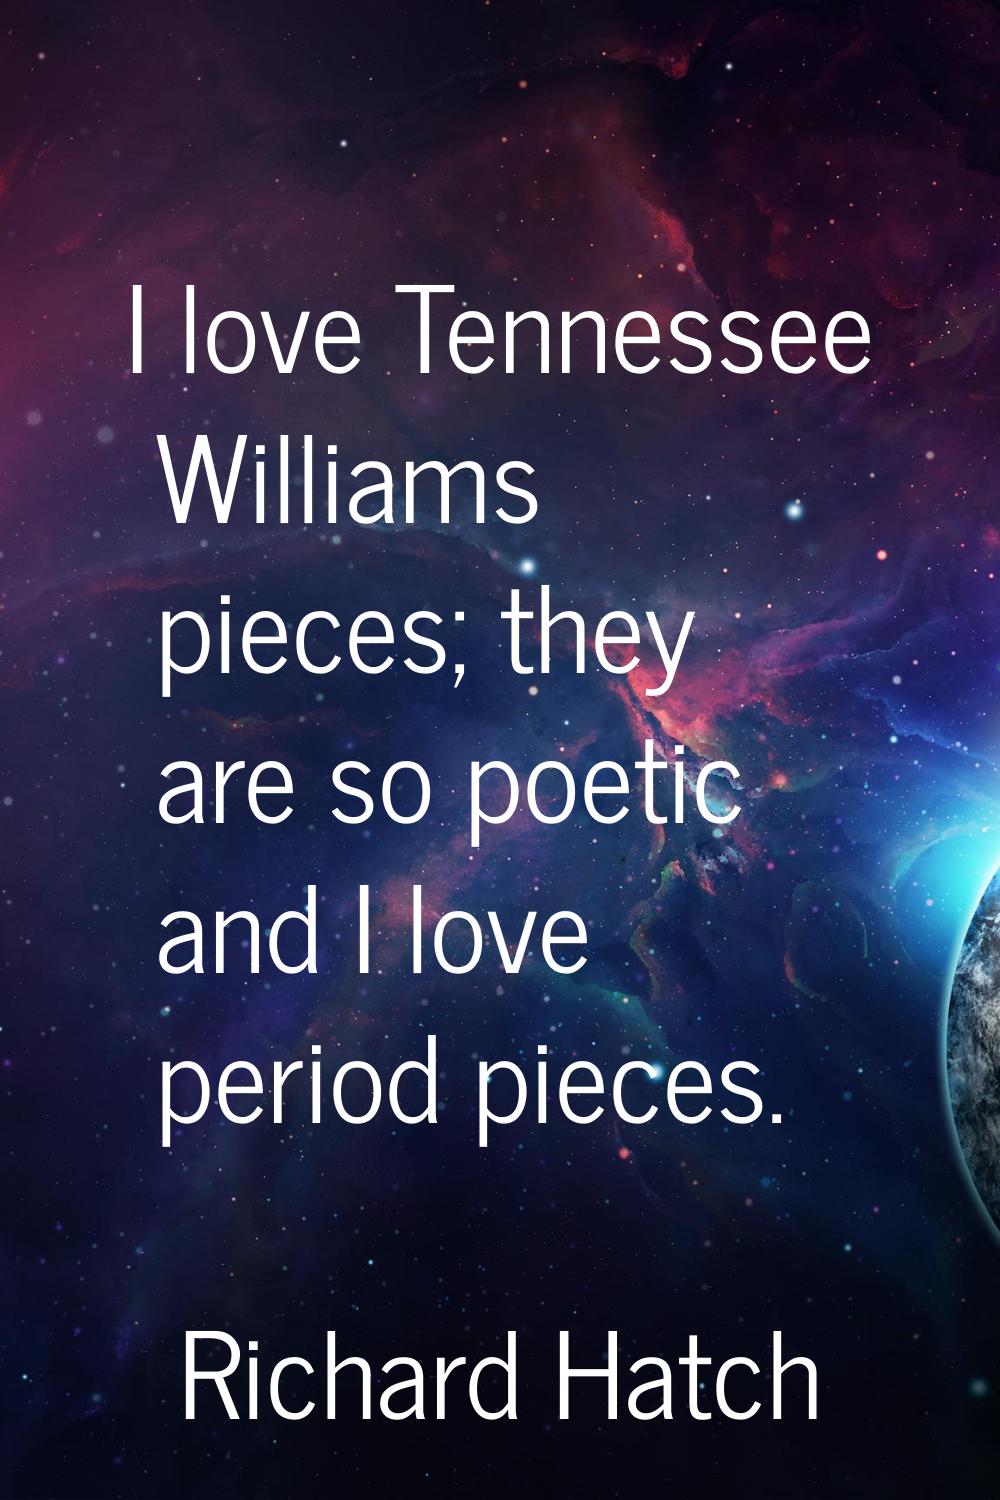 I love Tennessee Williams pieces; they are so poetic and I love period pieces.